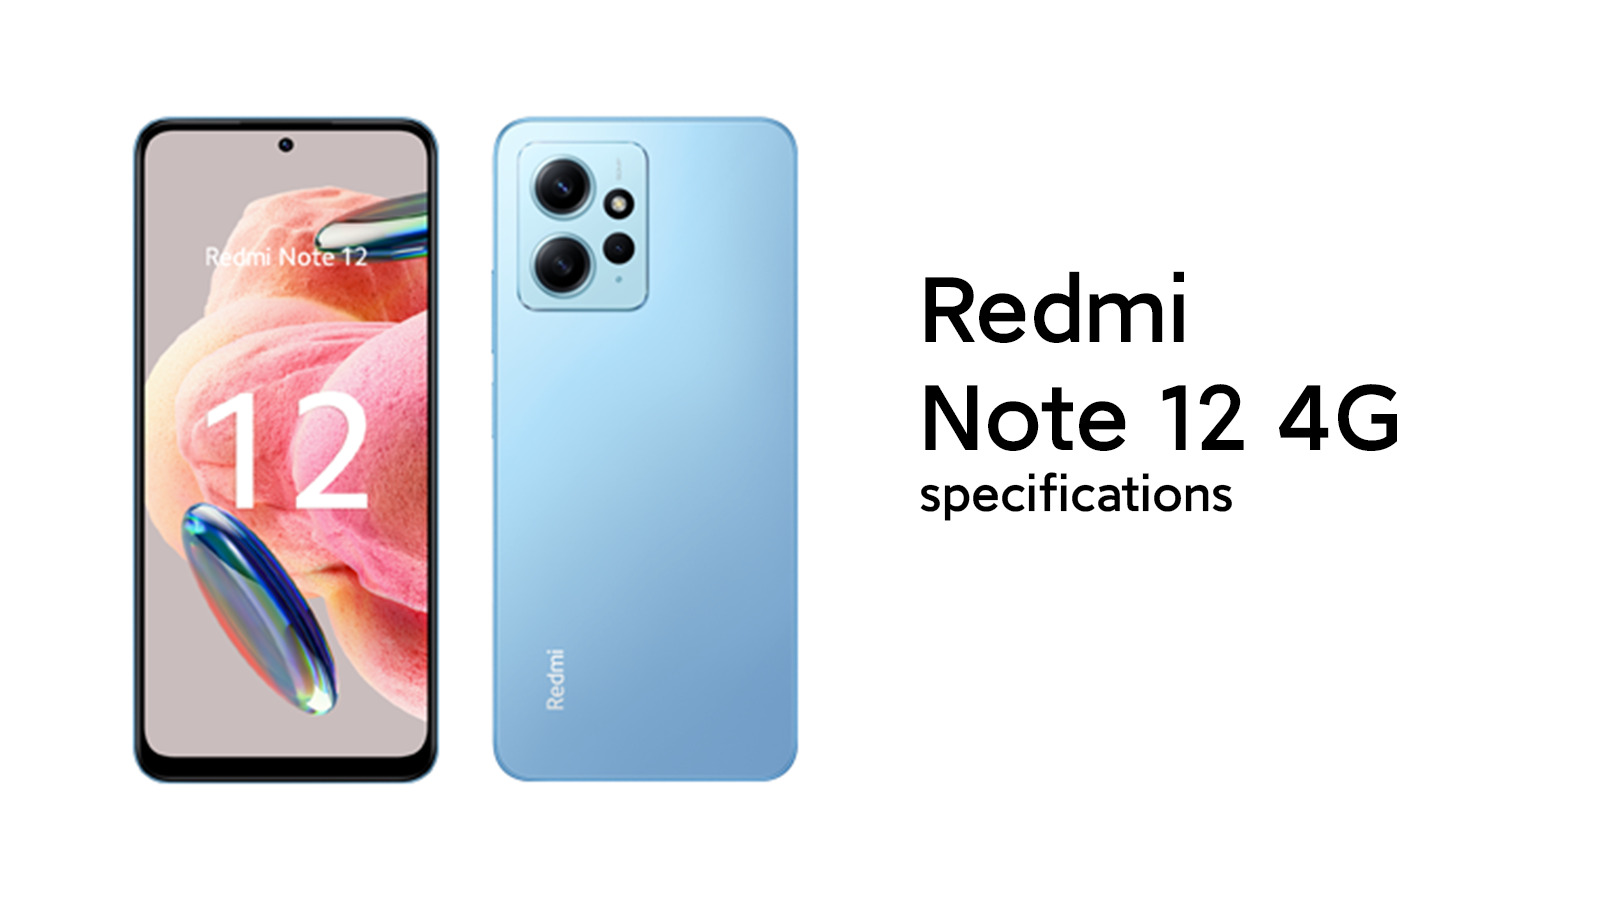 Full specifications and pricing of upcoming Redmi Note 12 4G are here! - xiaomiui